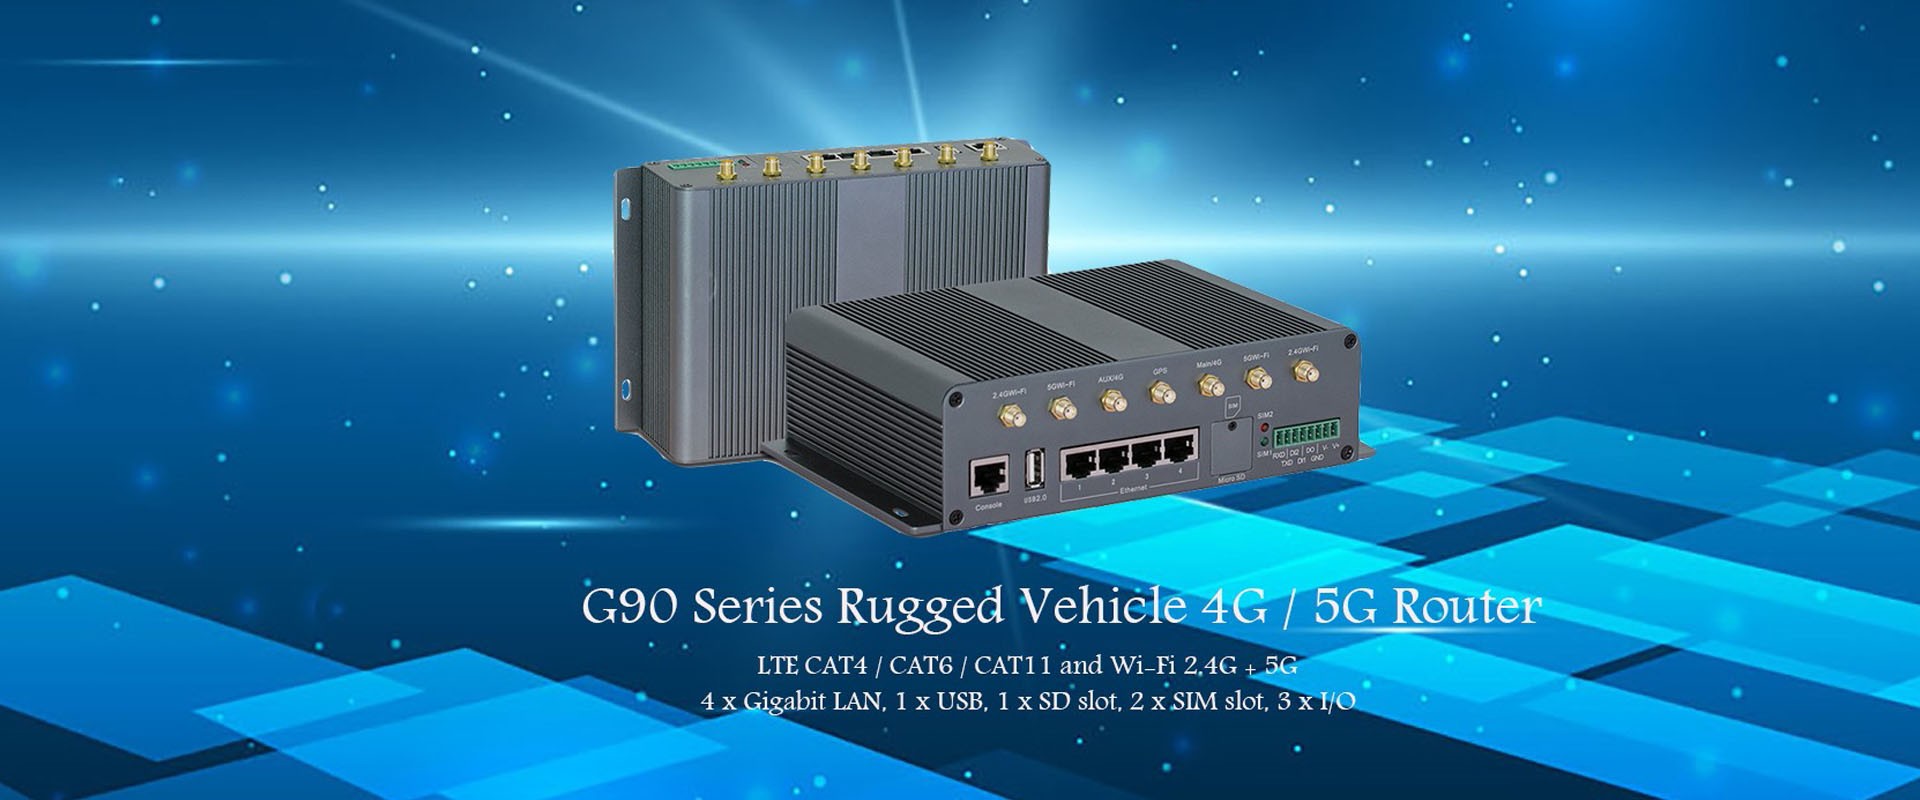 G90 Router